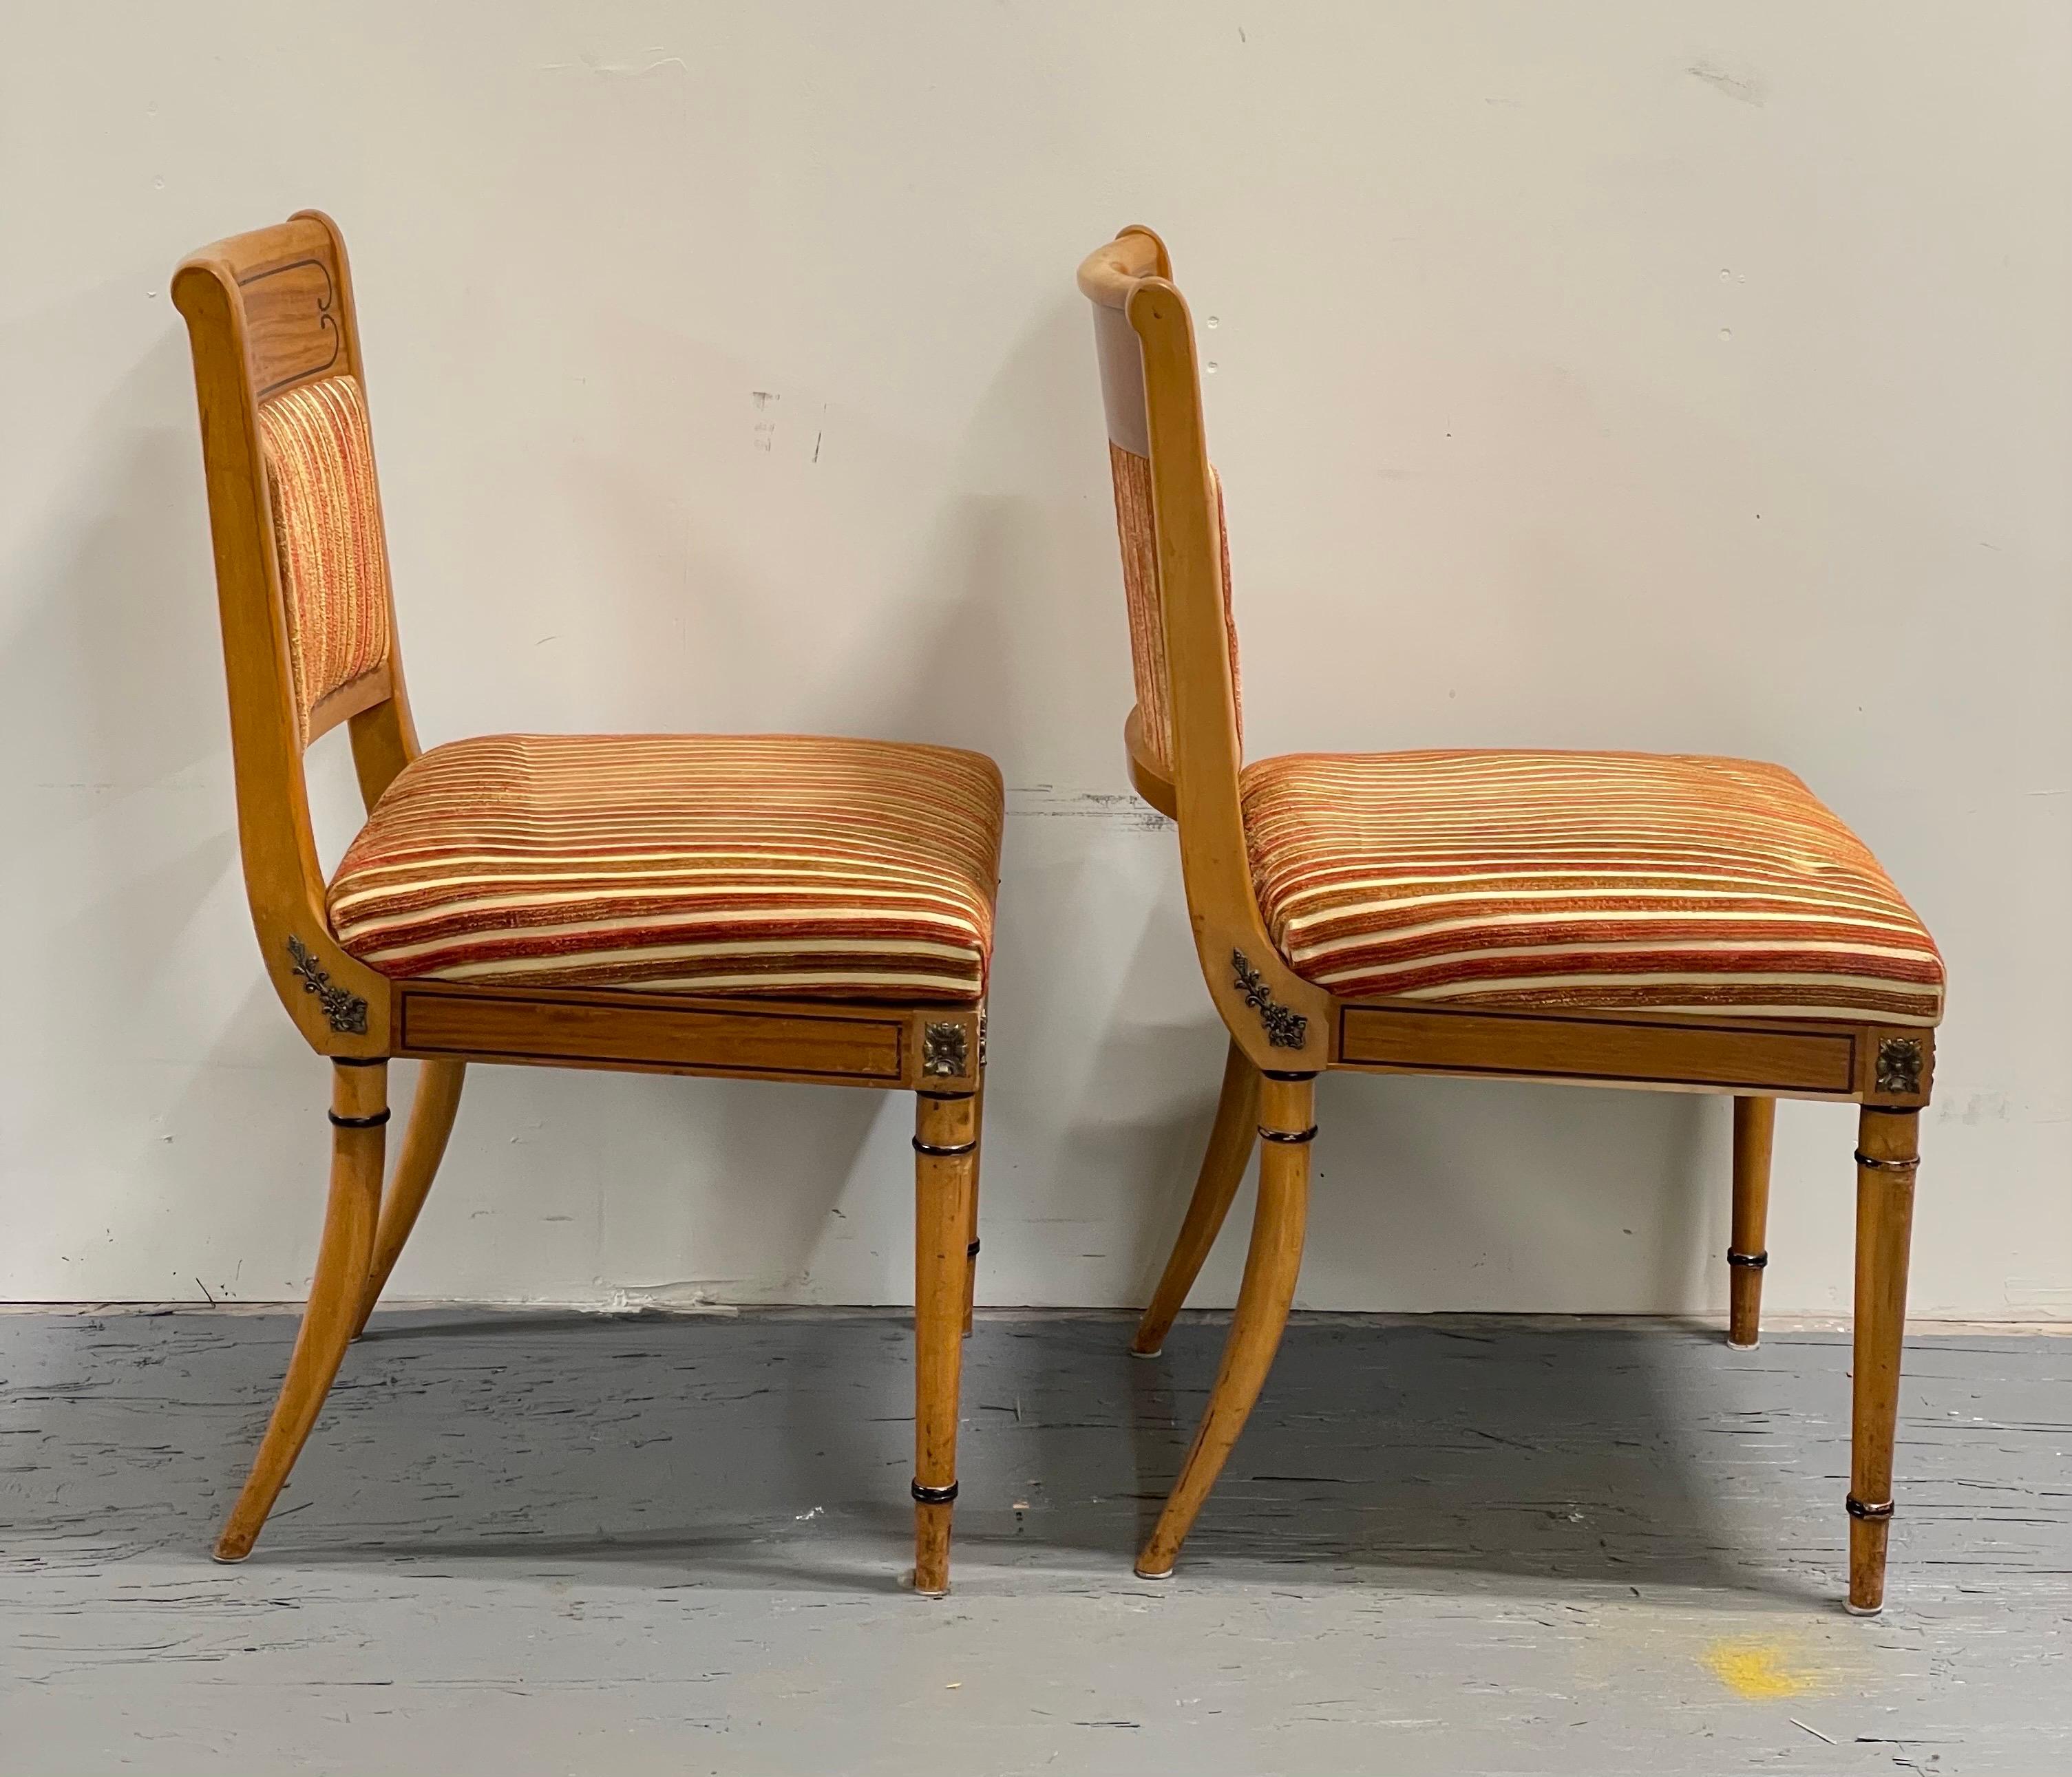 Vintage chairs with all the bells and whistles. Great lines and attention to detail with brass emblems and black outline accent. Sleek curves complement this classic design.